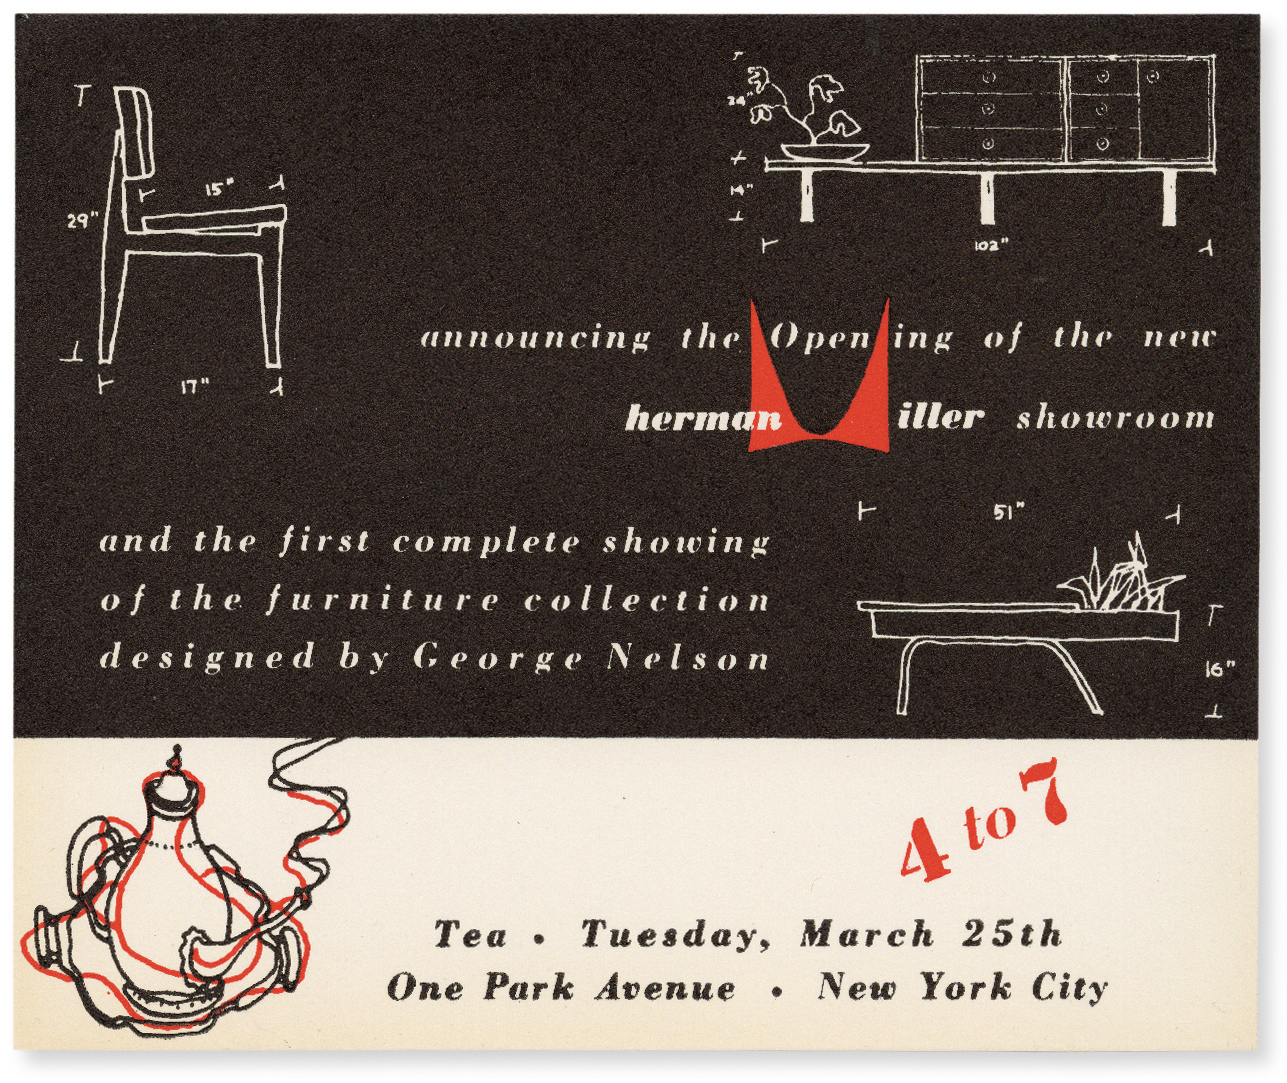 Herman Miller invitation featuring sketches by George Nelson, 1947. Picture credit: courtesy and copyright © Herman Miller Archives 